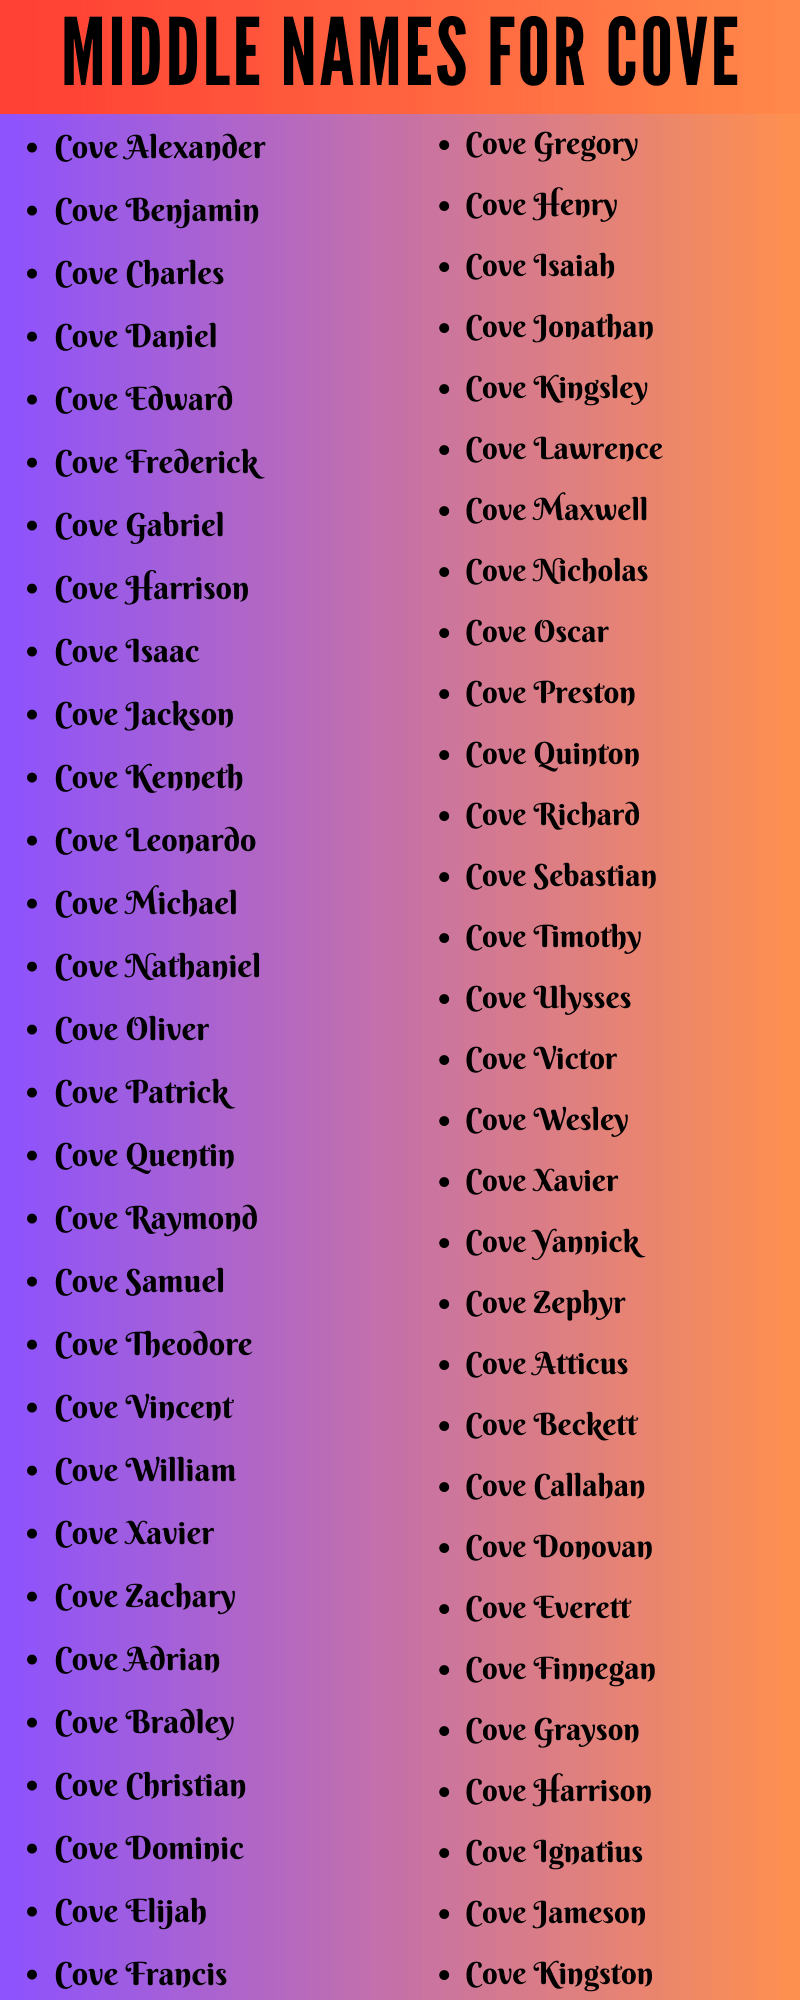 400 Creative Middle Names For Cove